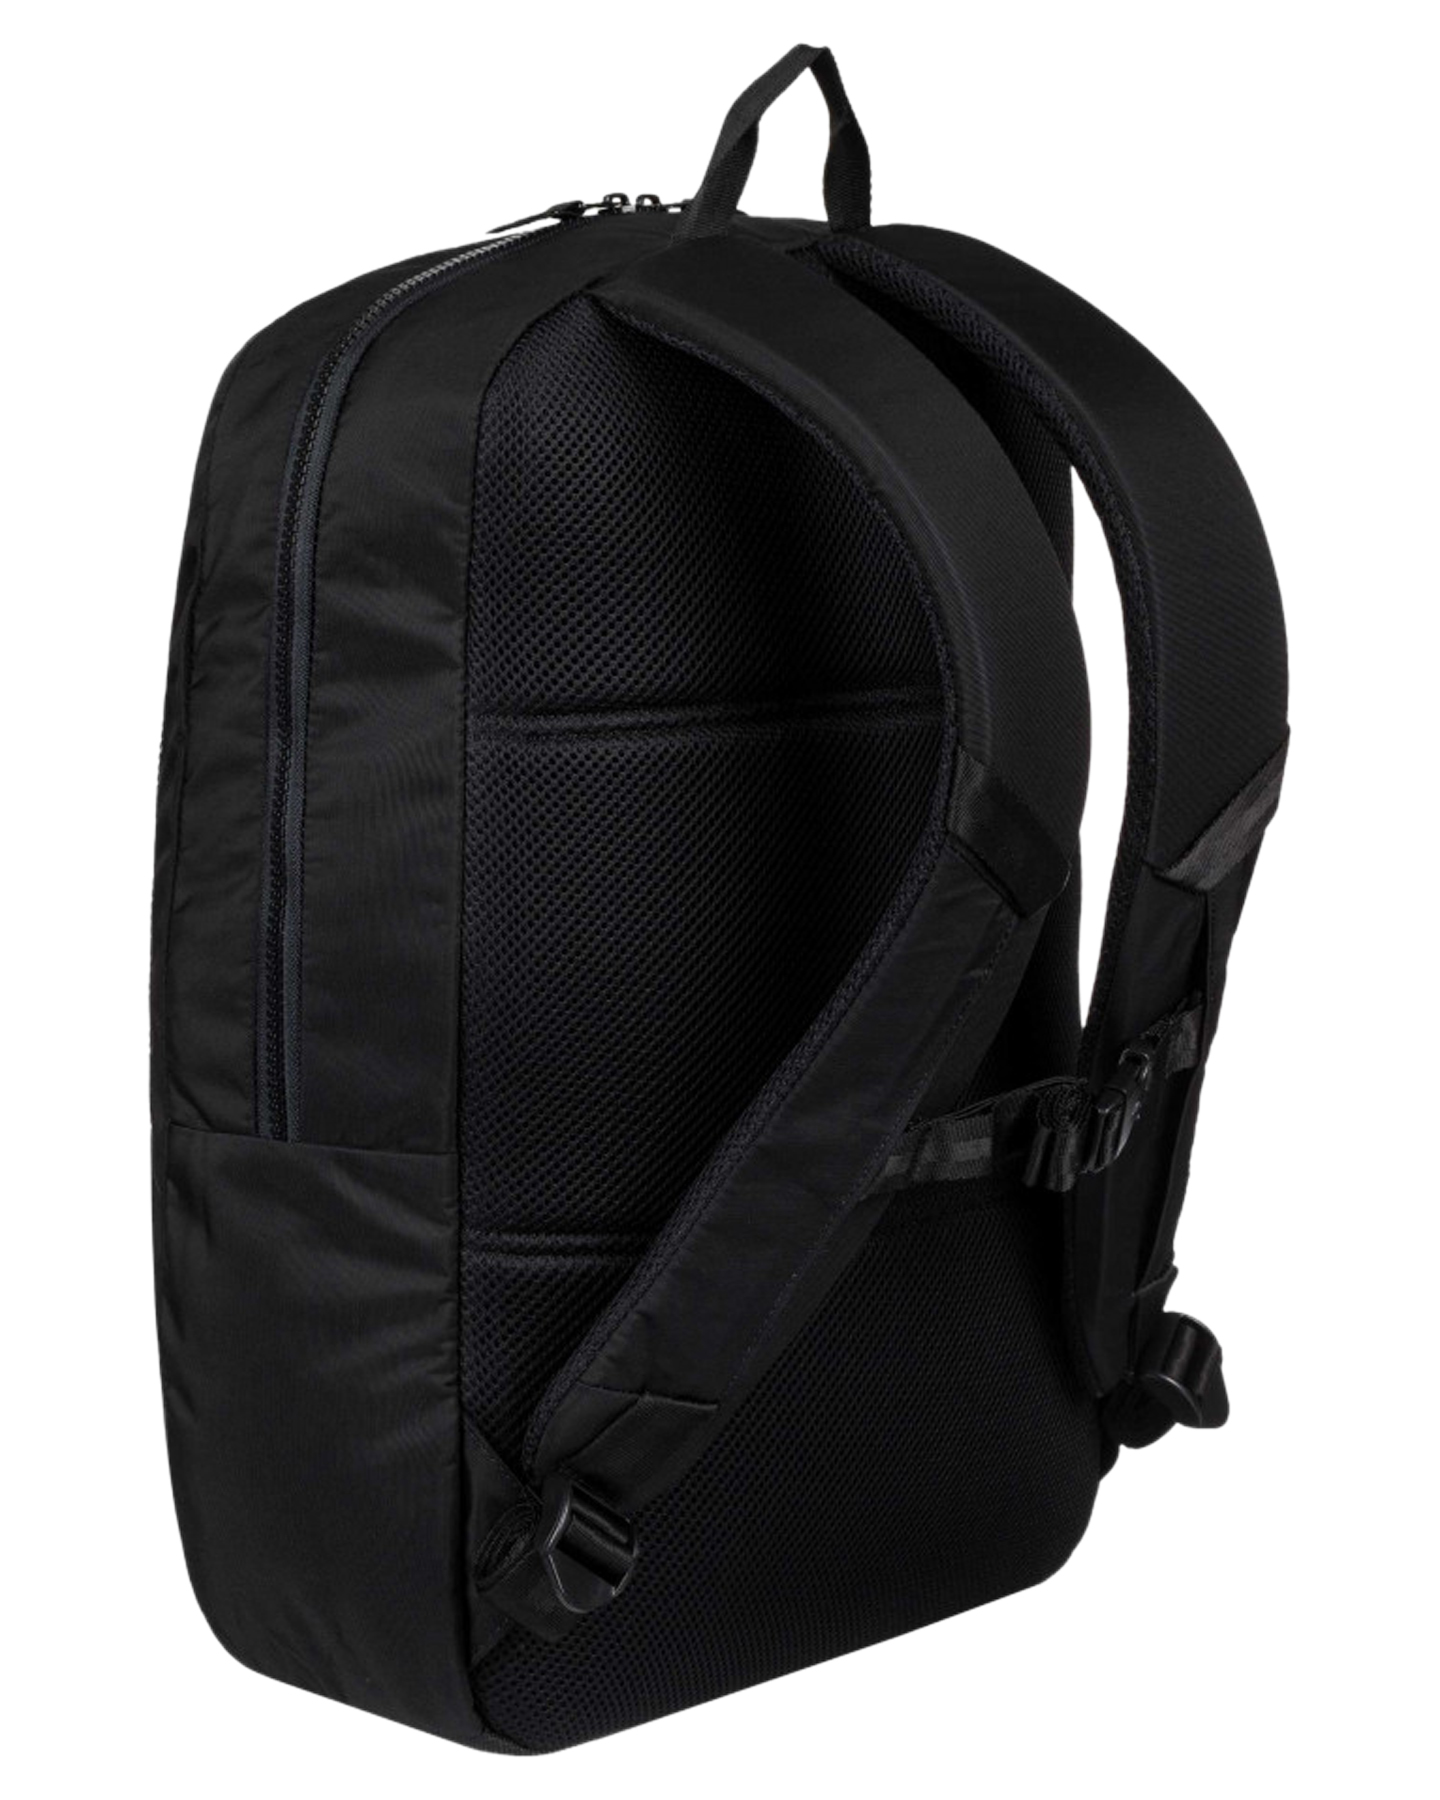 Quiksilver 50Y Backpack - Black | SurfStitch